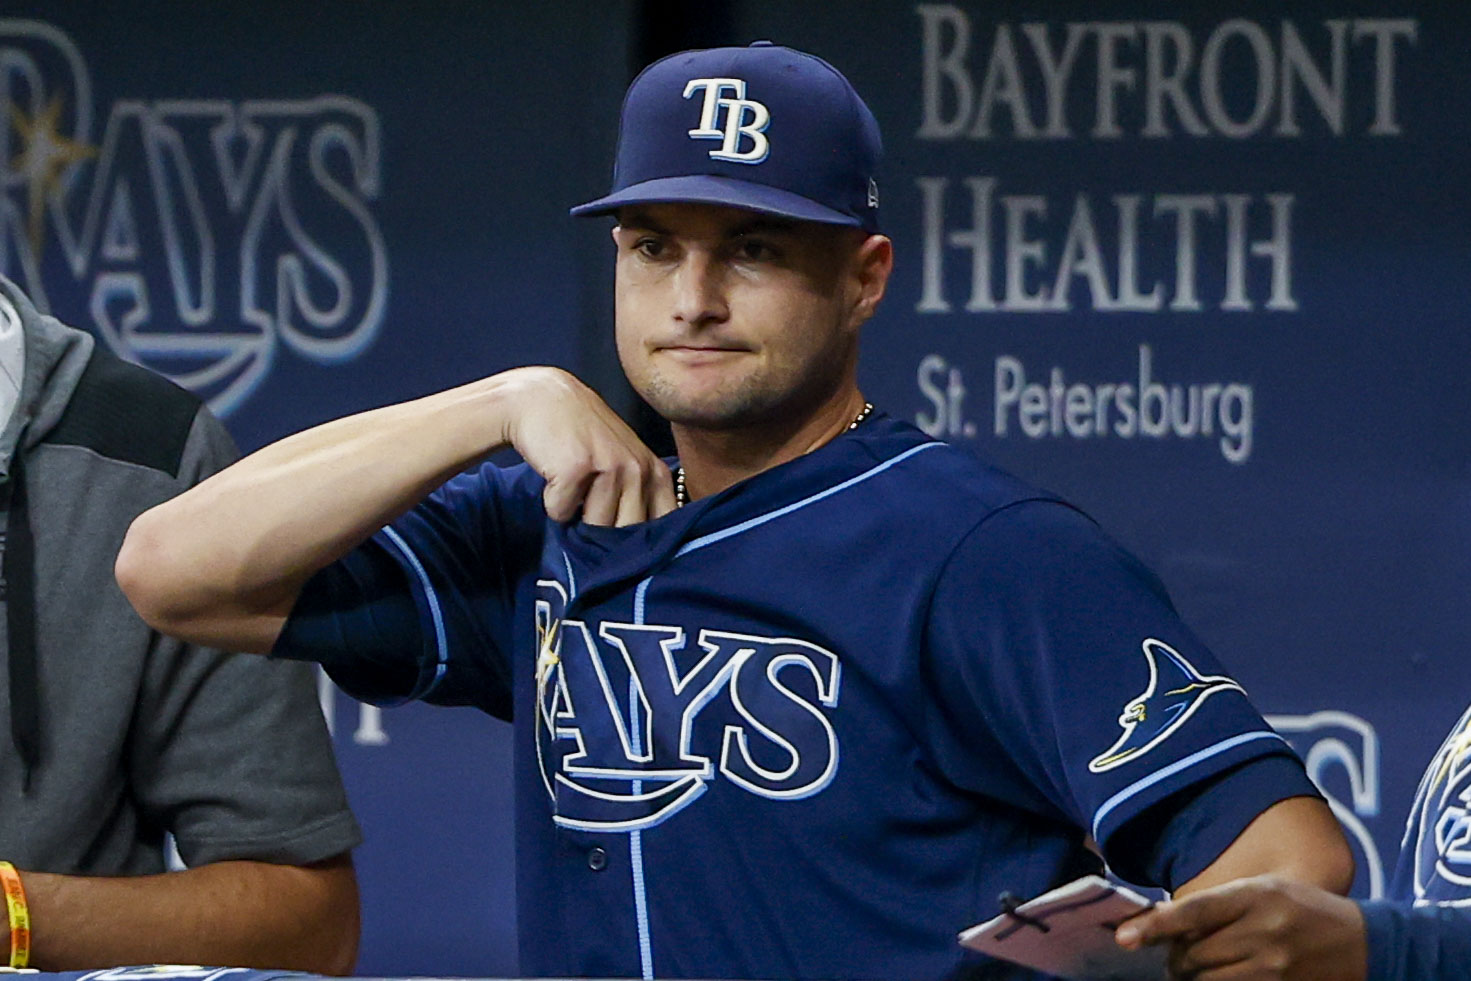 Shane McClanahan injury update: Rays place ace on injured list